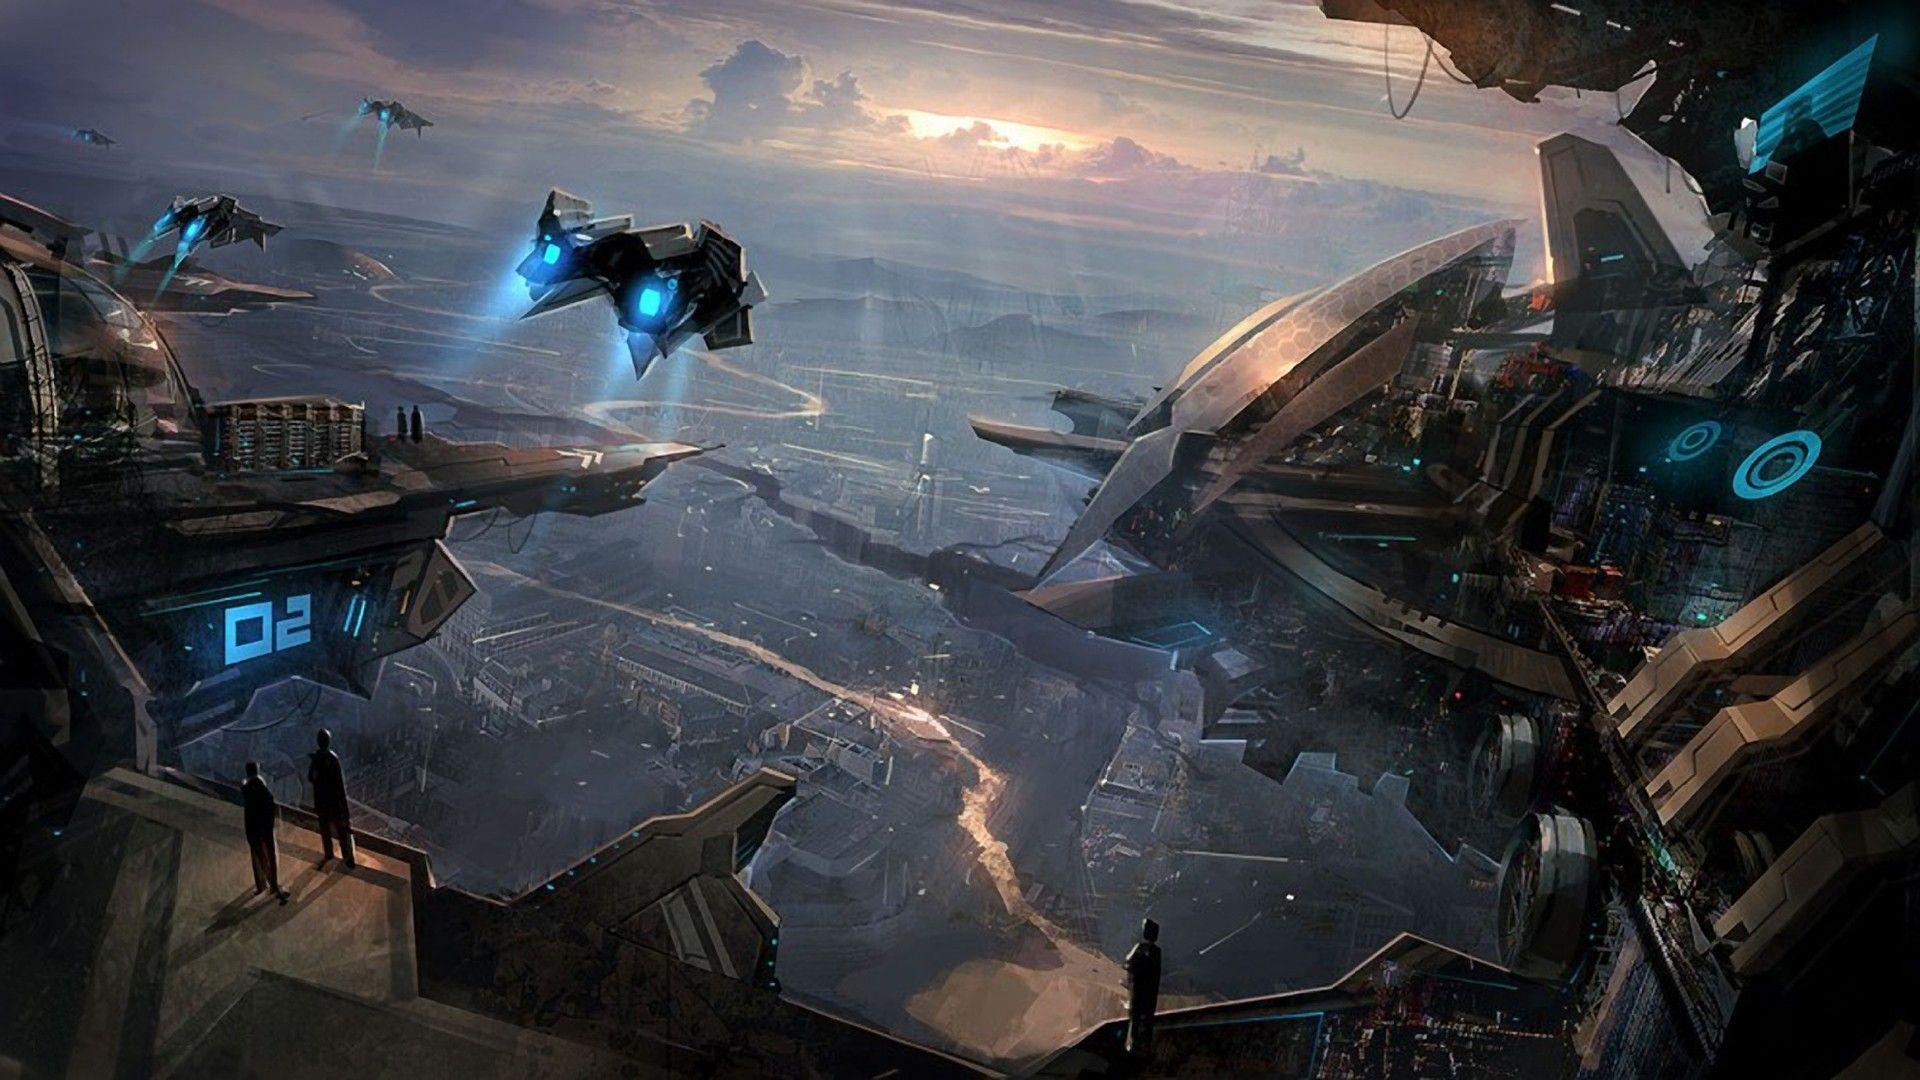 Ships in the futuristic city Wallpapers #